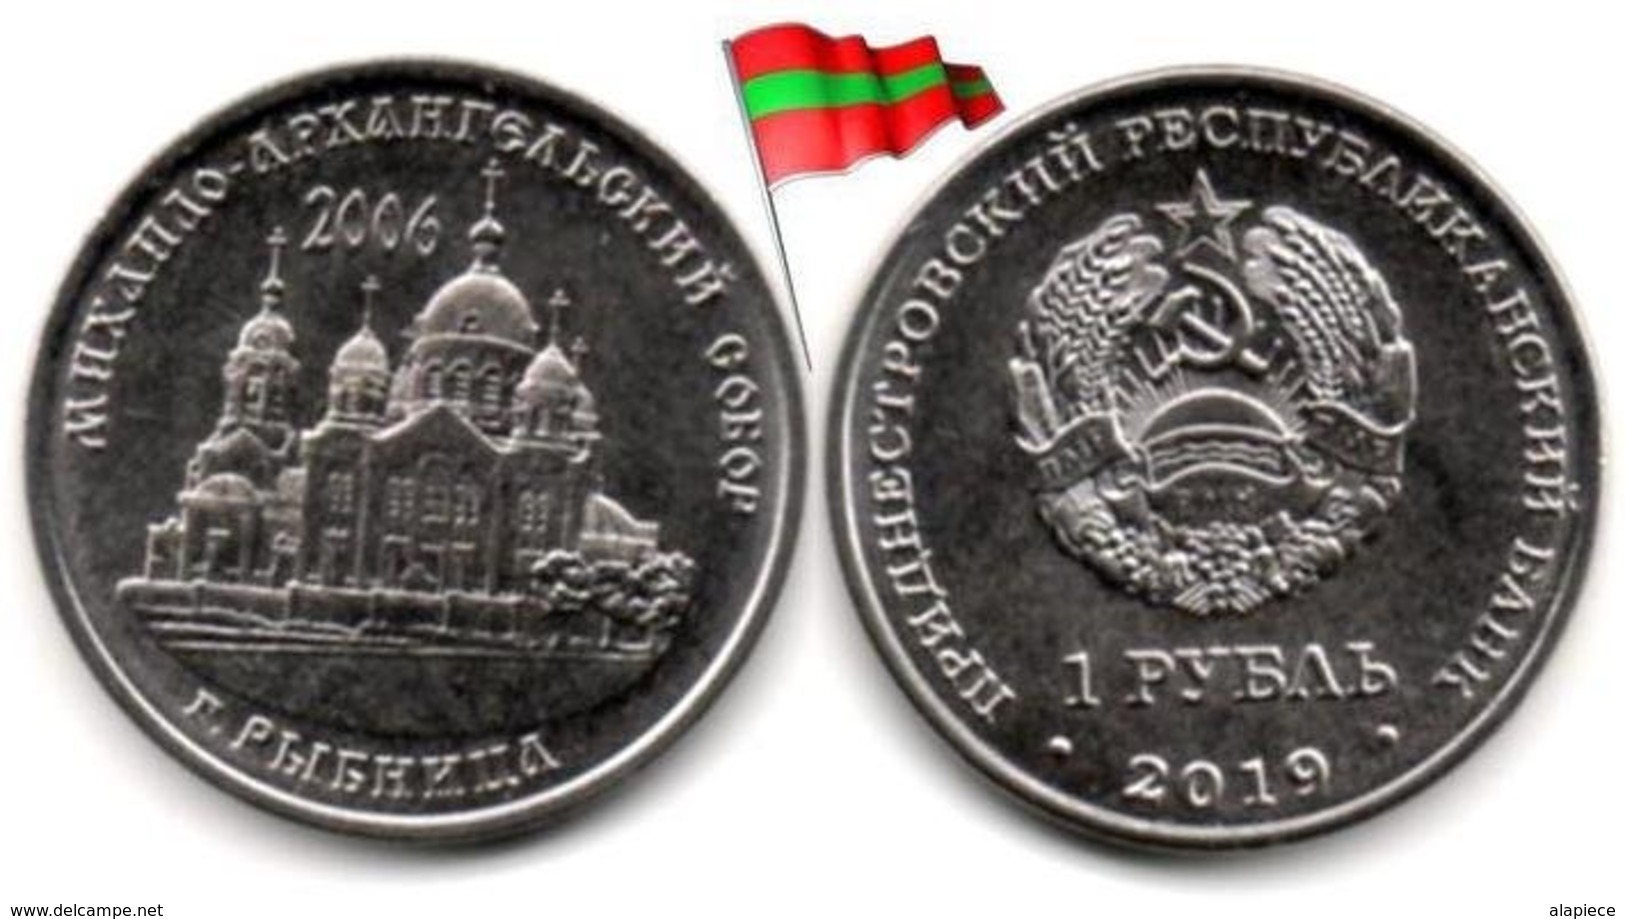 Transnistria - 1 Rouble 2019 (St. Michael The Archangel Cathedral Rybnitsa - 50,000 Ex.) - Moldova